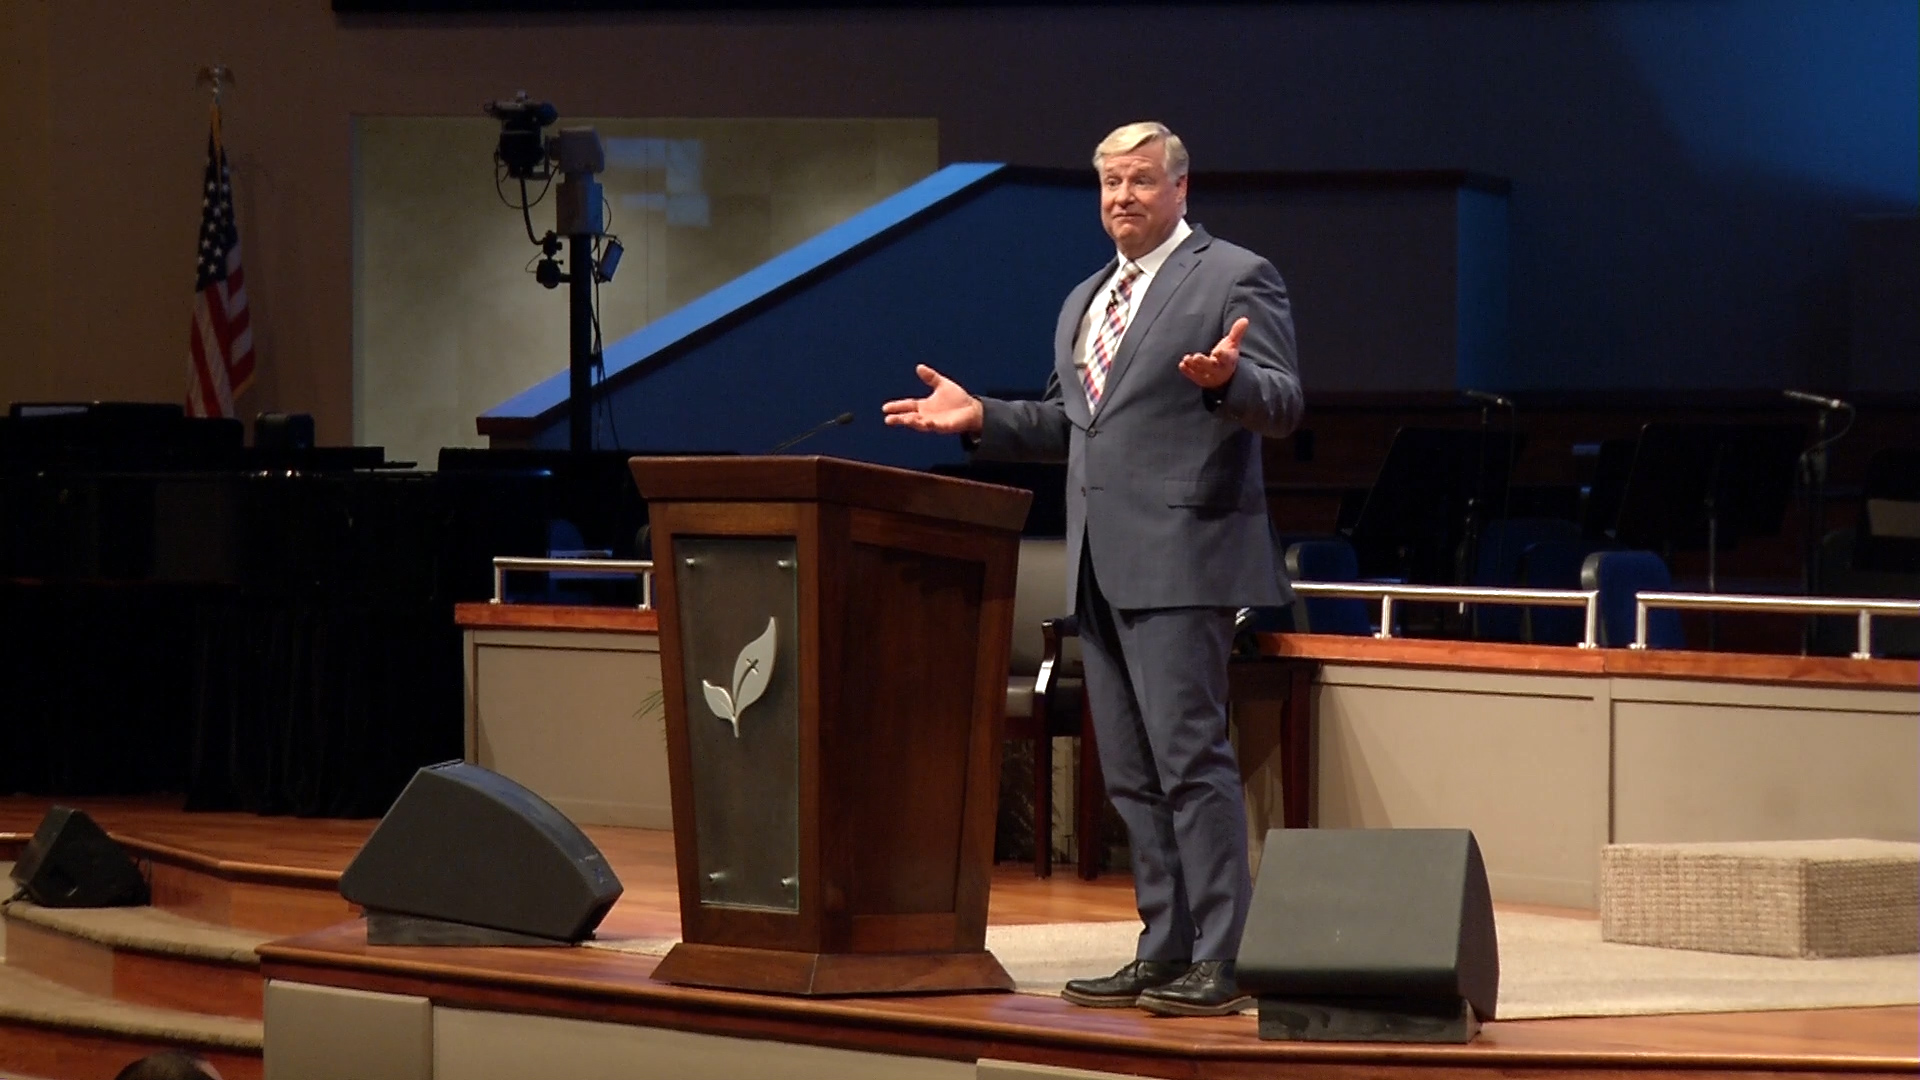 Dr. Jim Schettler: Good Vision Leads to Great Victory